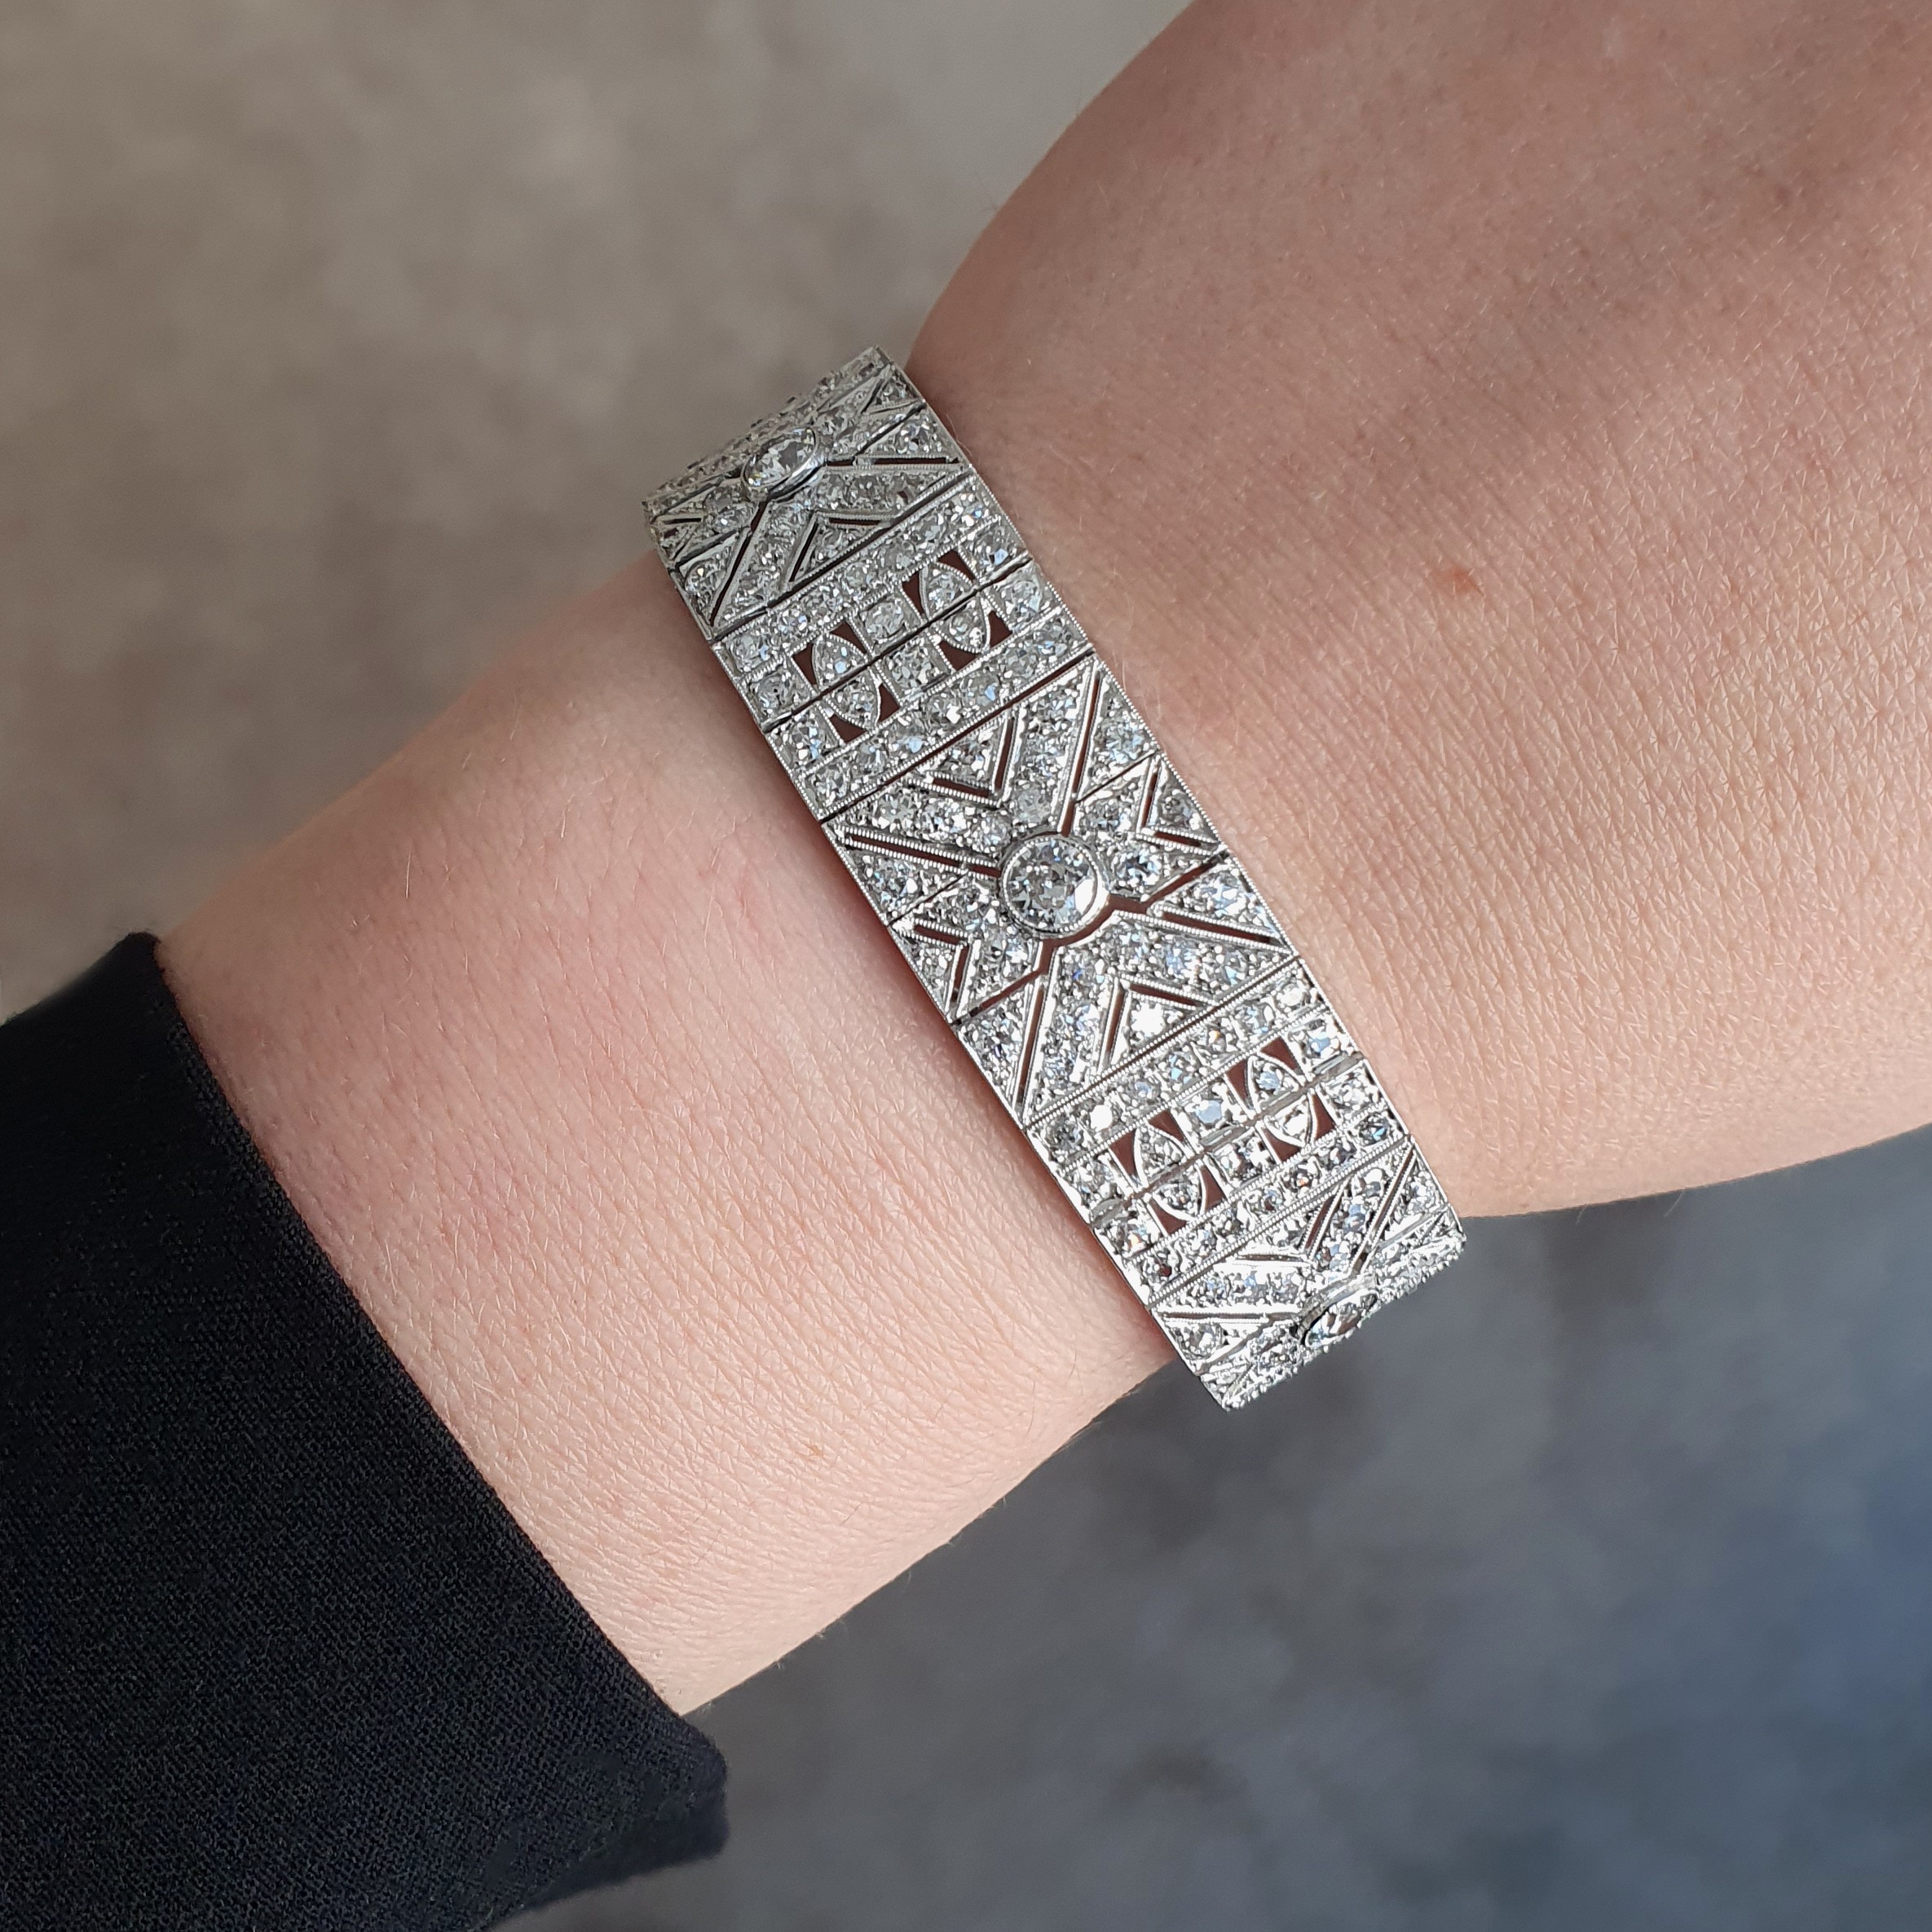 The bracelet is worn on the hand and shows the front of the French Art Deco, Diamond and Platinum Bracelet. Very beautiful and elegant Art Deco design.